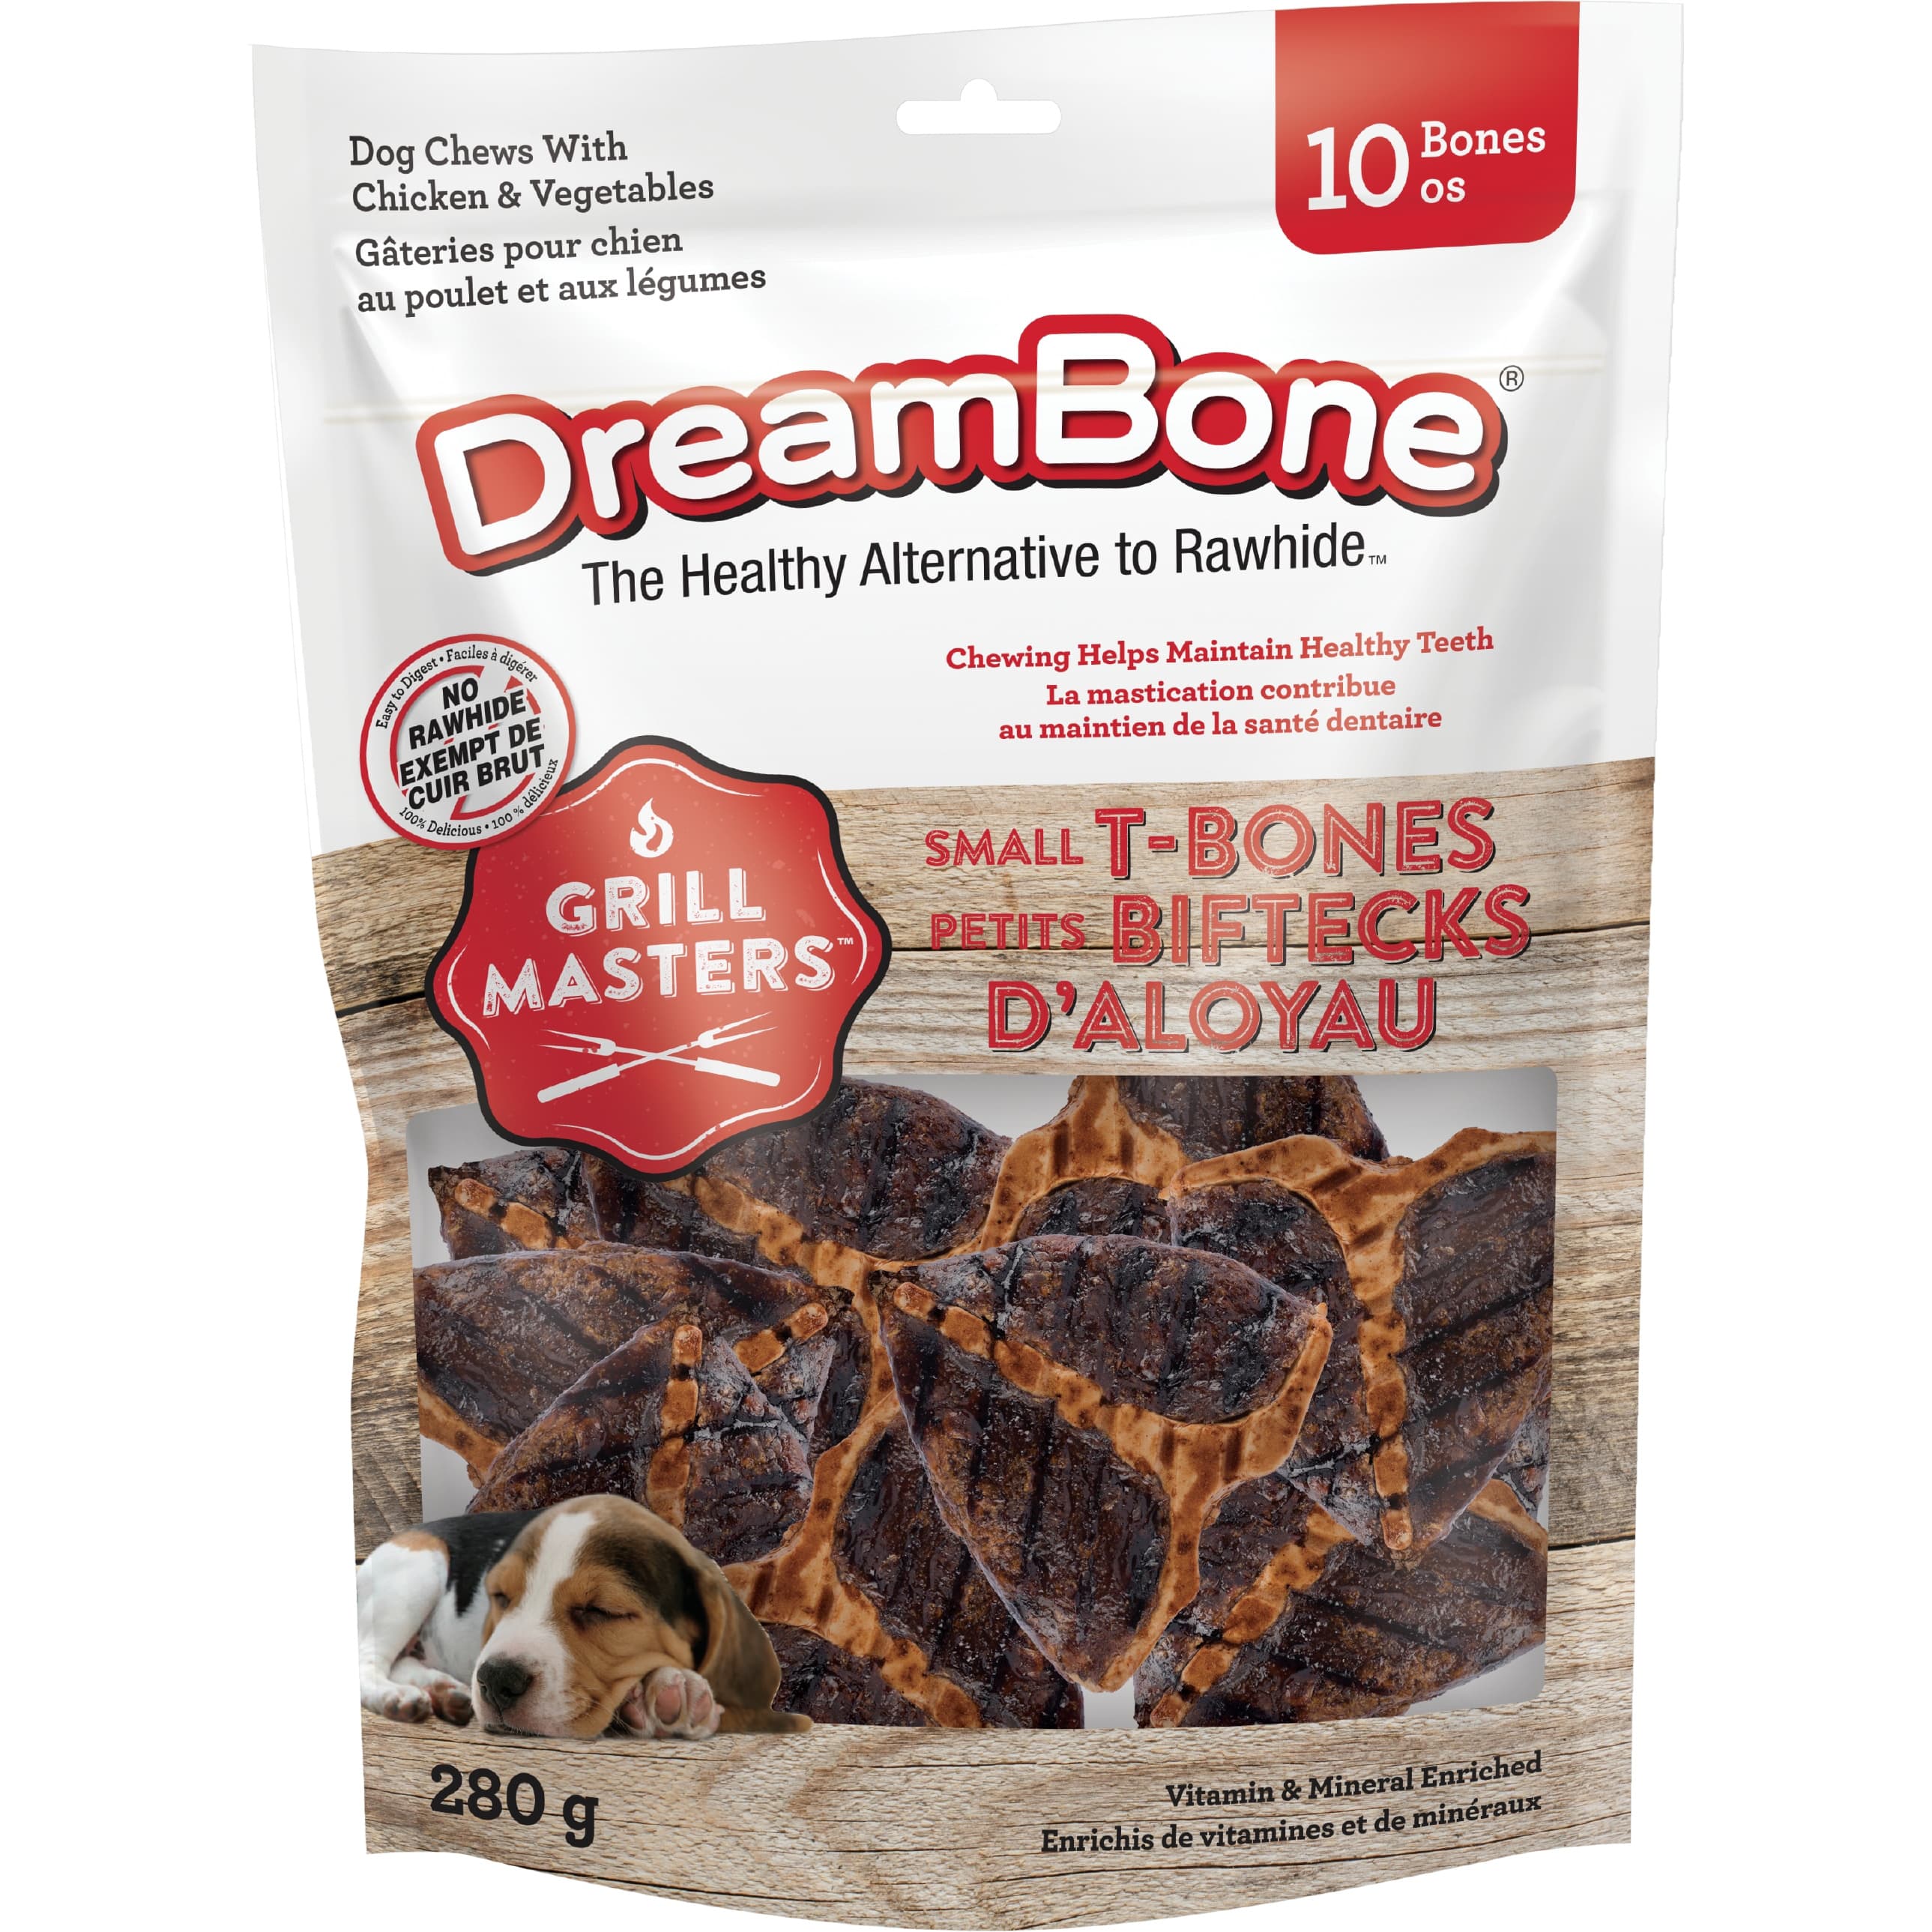 DreamBone Grill Masters T-Bones, No-Rawhide Chews for Dogs – 10 Steaks